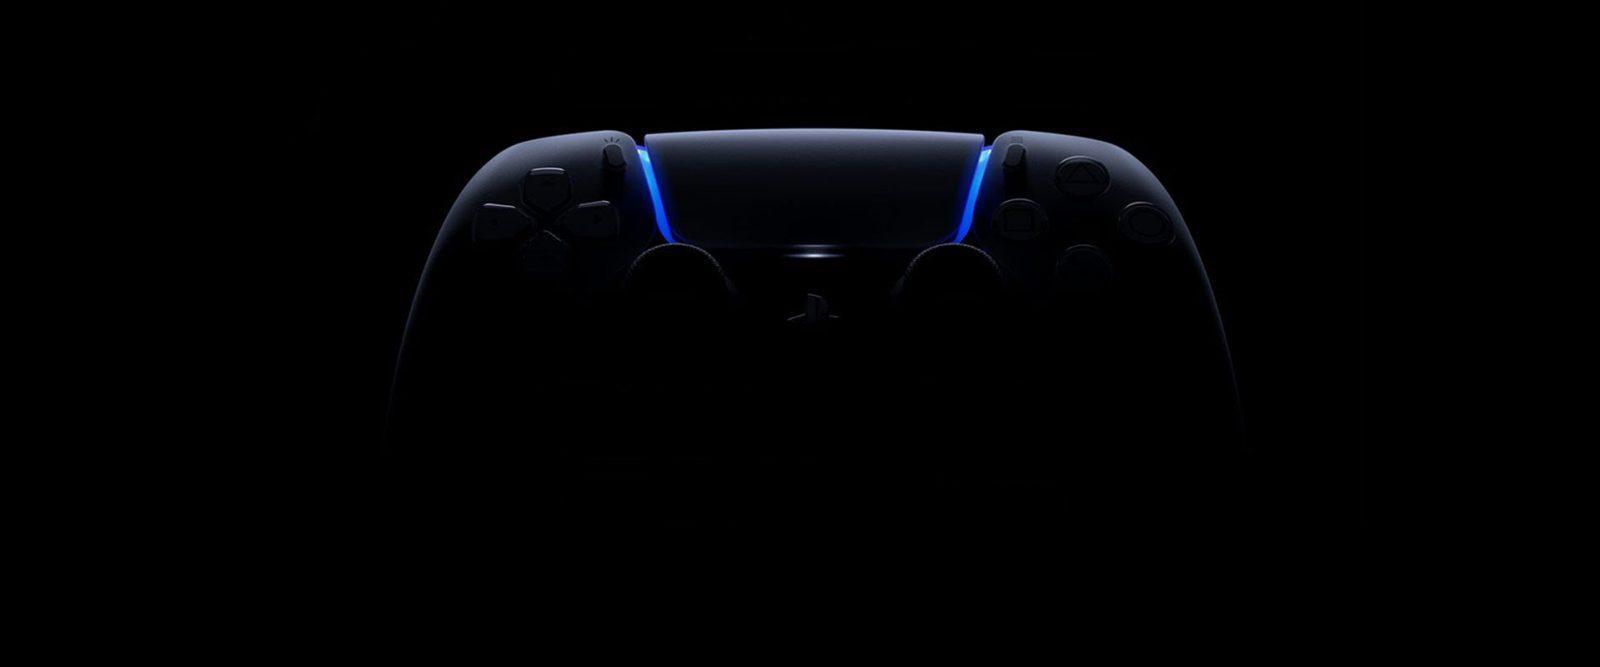 Will Sony reveal GT 7 this Thursday